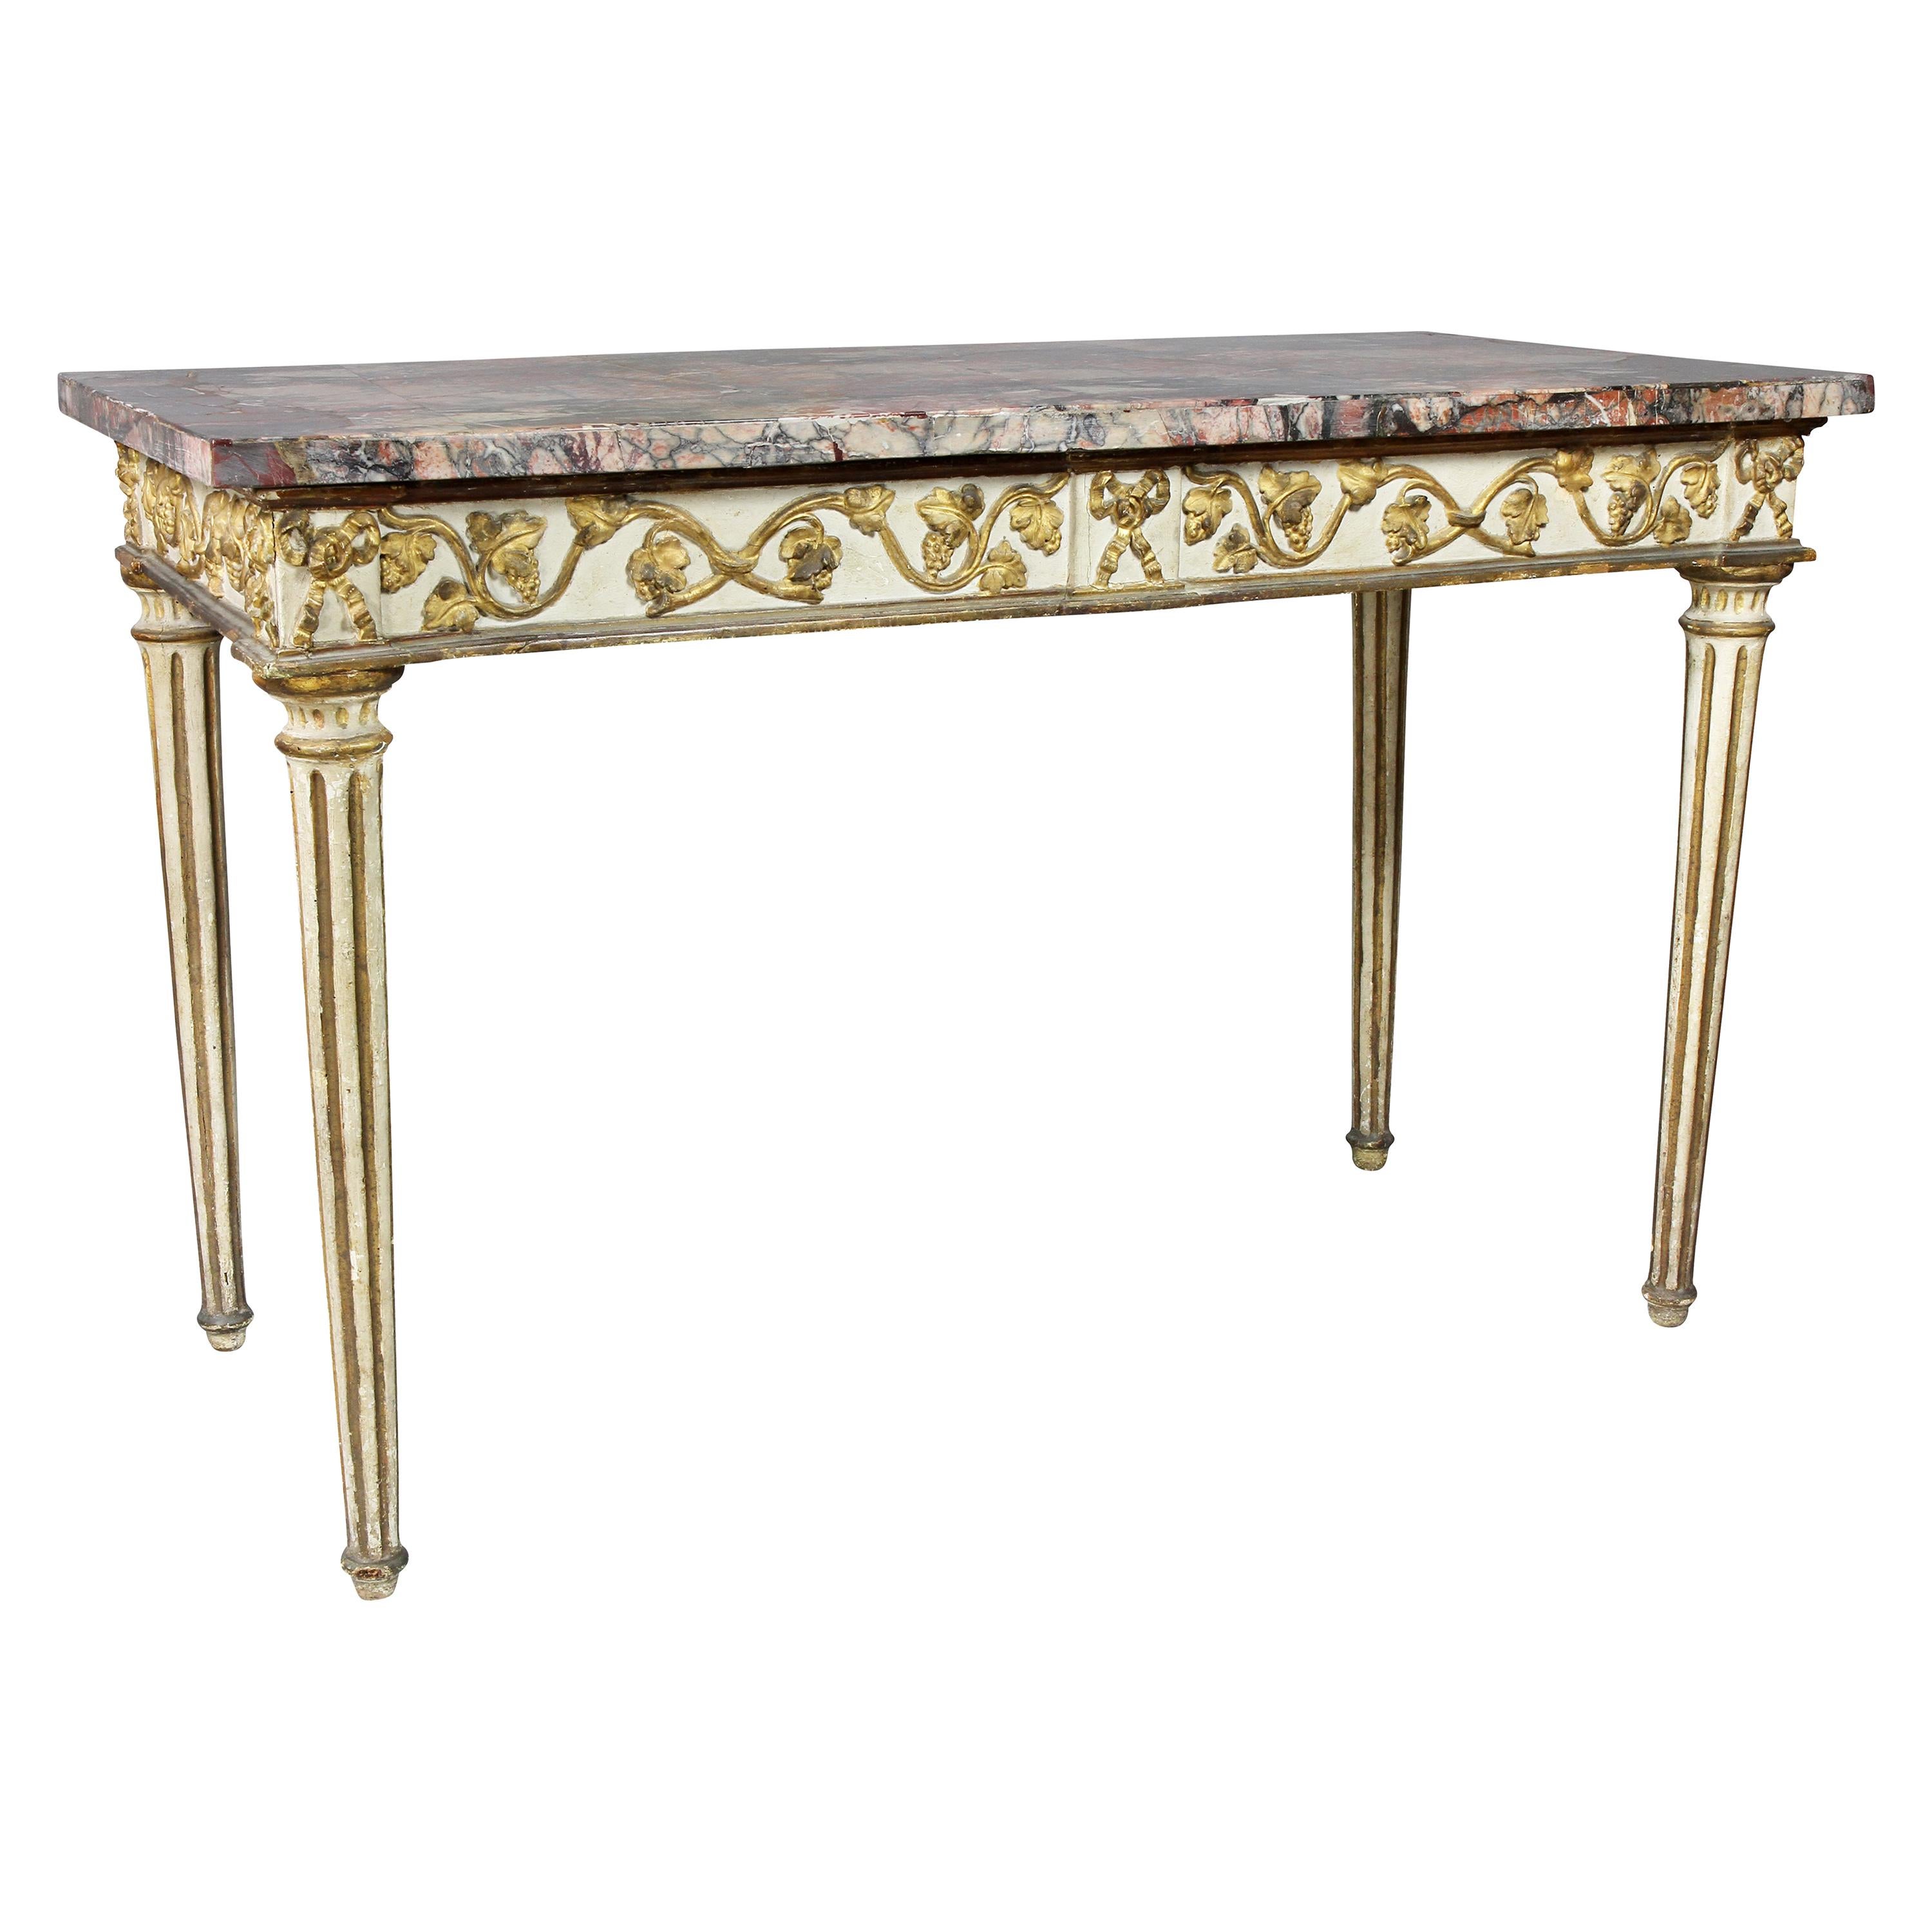 Italian Neoclassical Giltwood and Painted Console Table